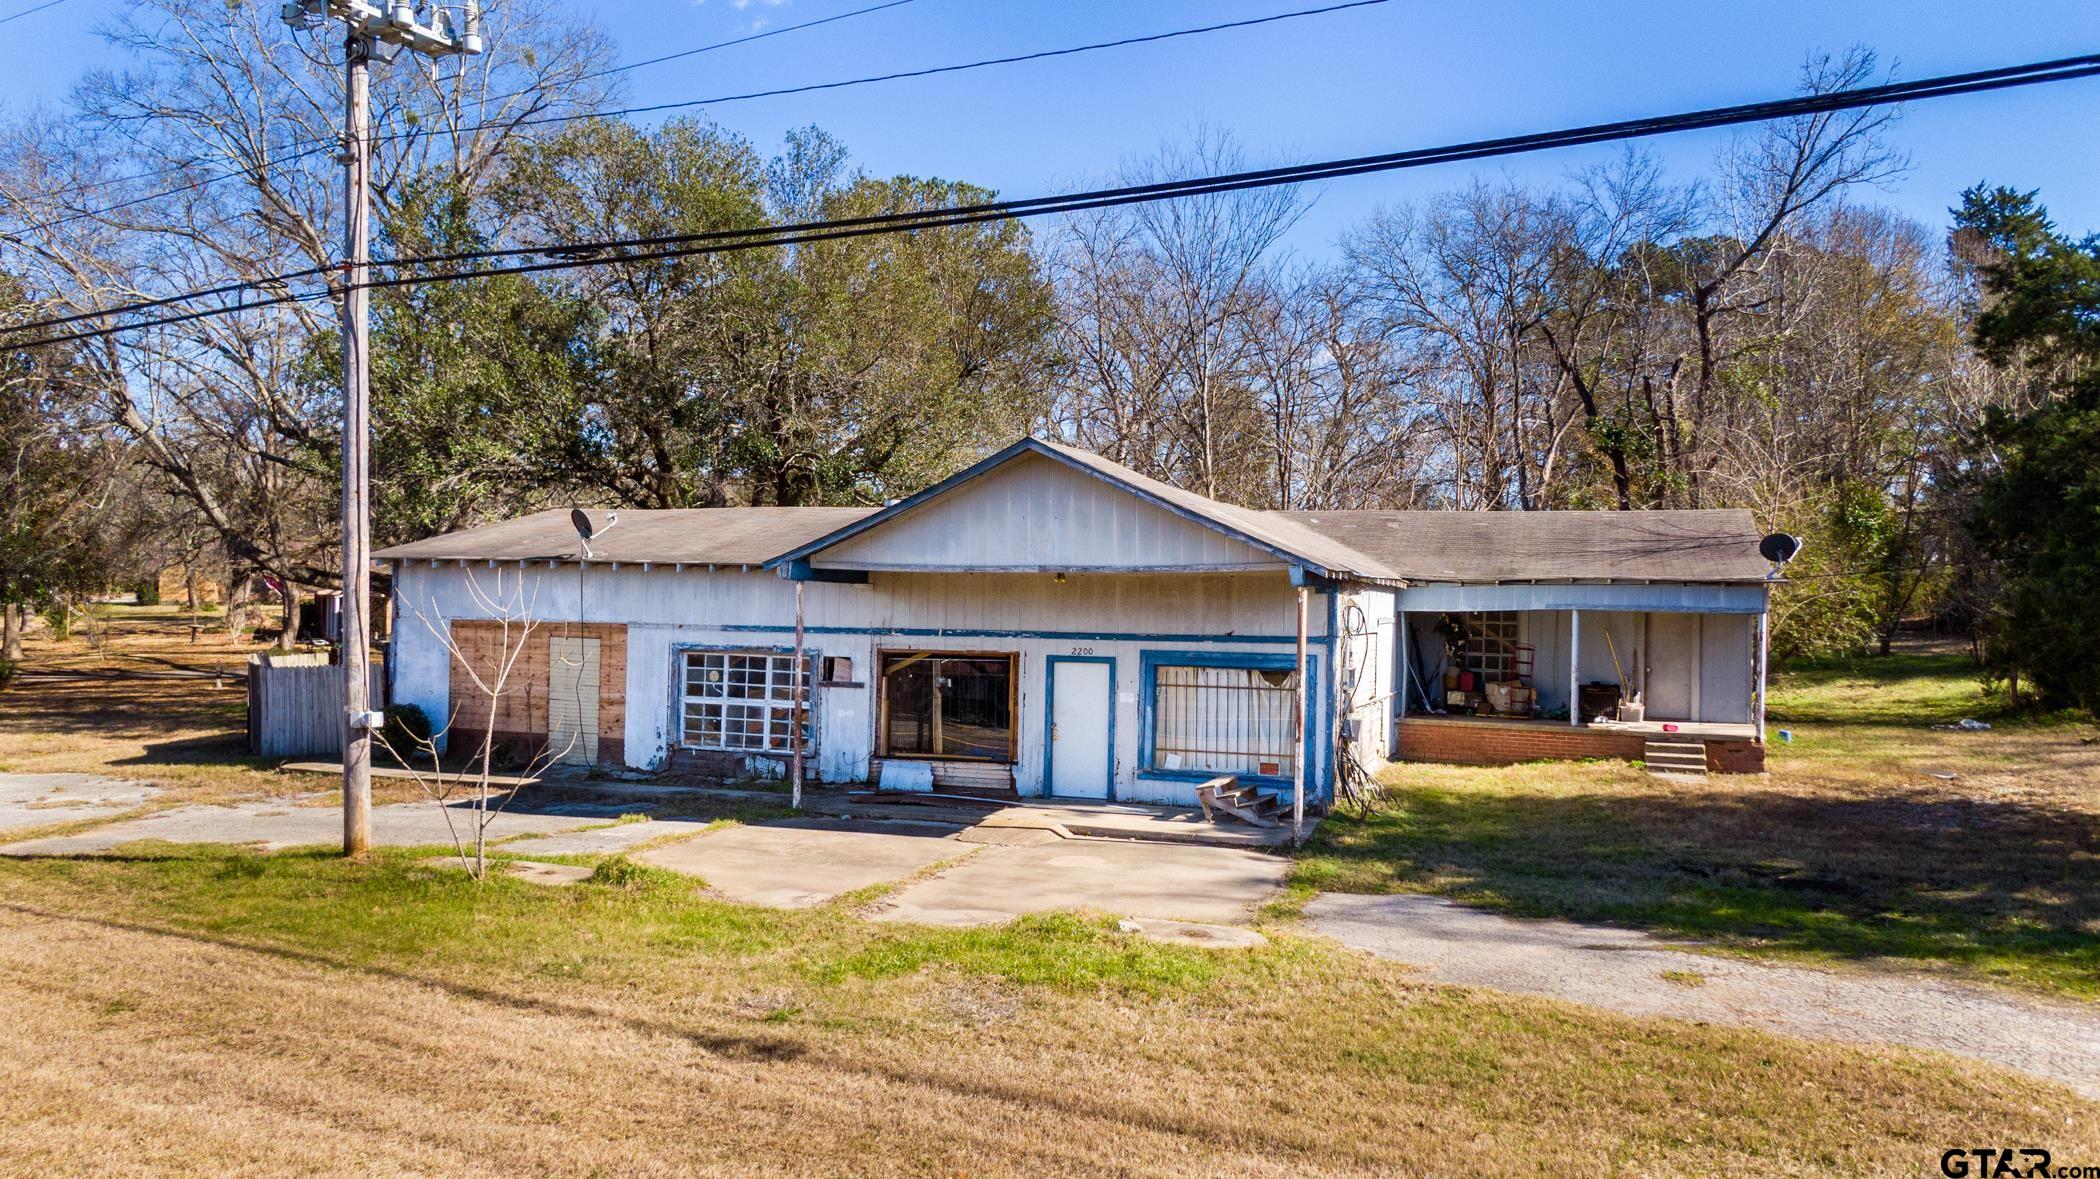 2200 Main, Gladewater, Texas 75647, ,Building,For Sale,Main,10144973